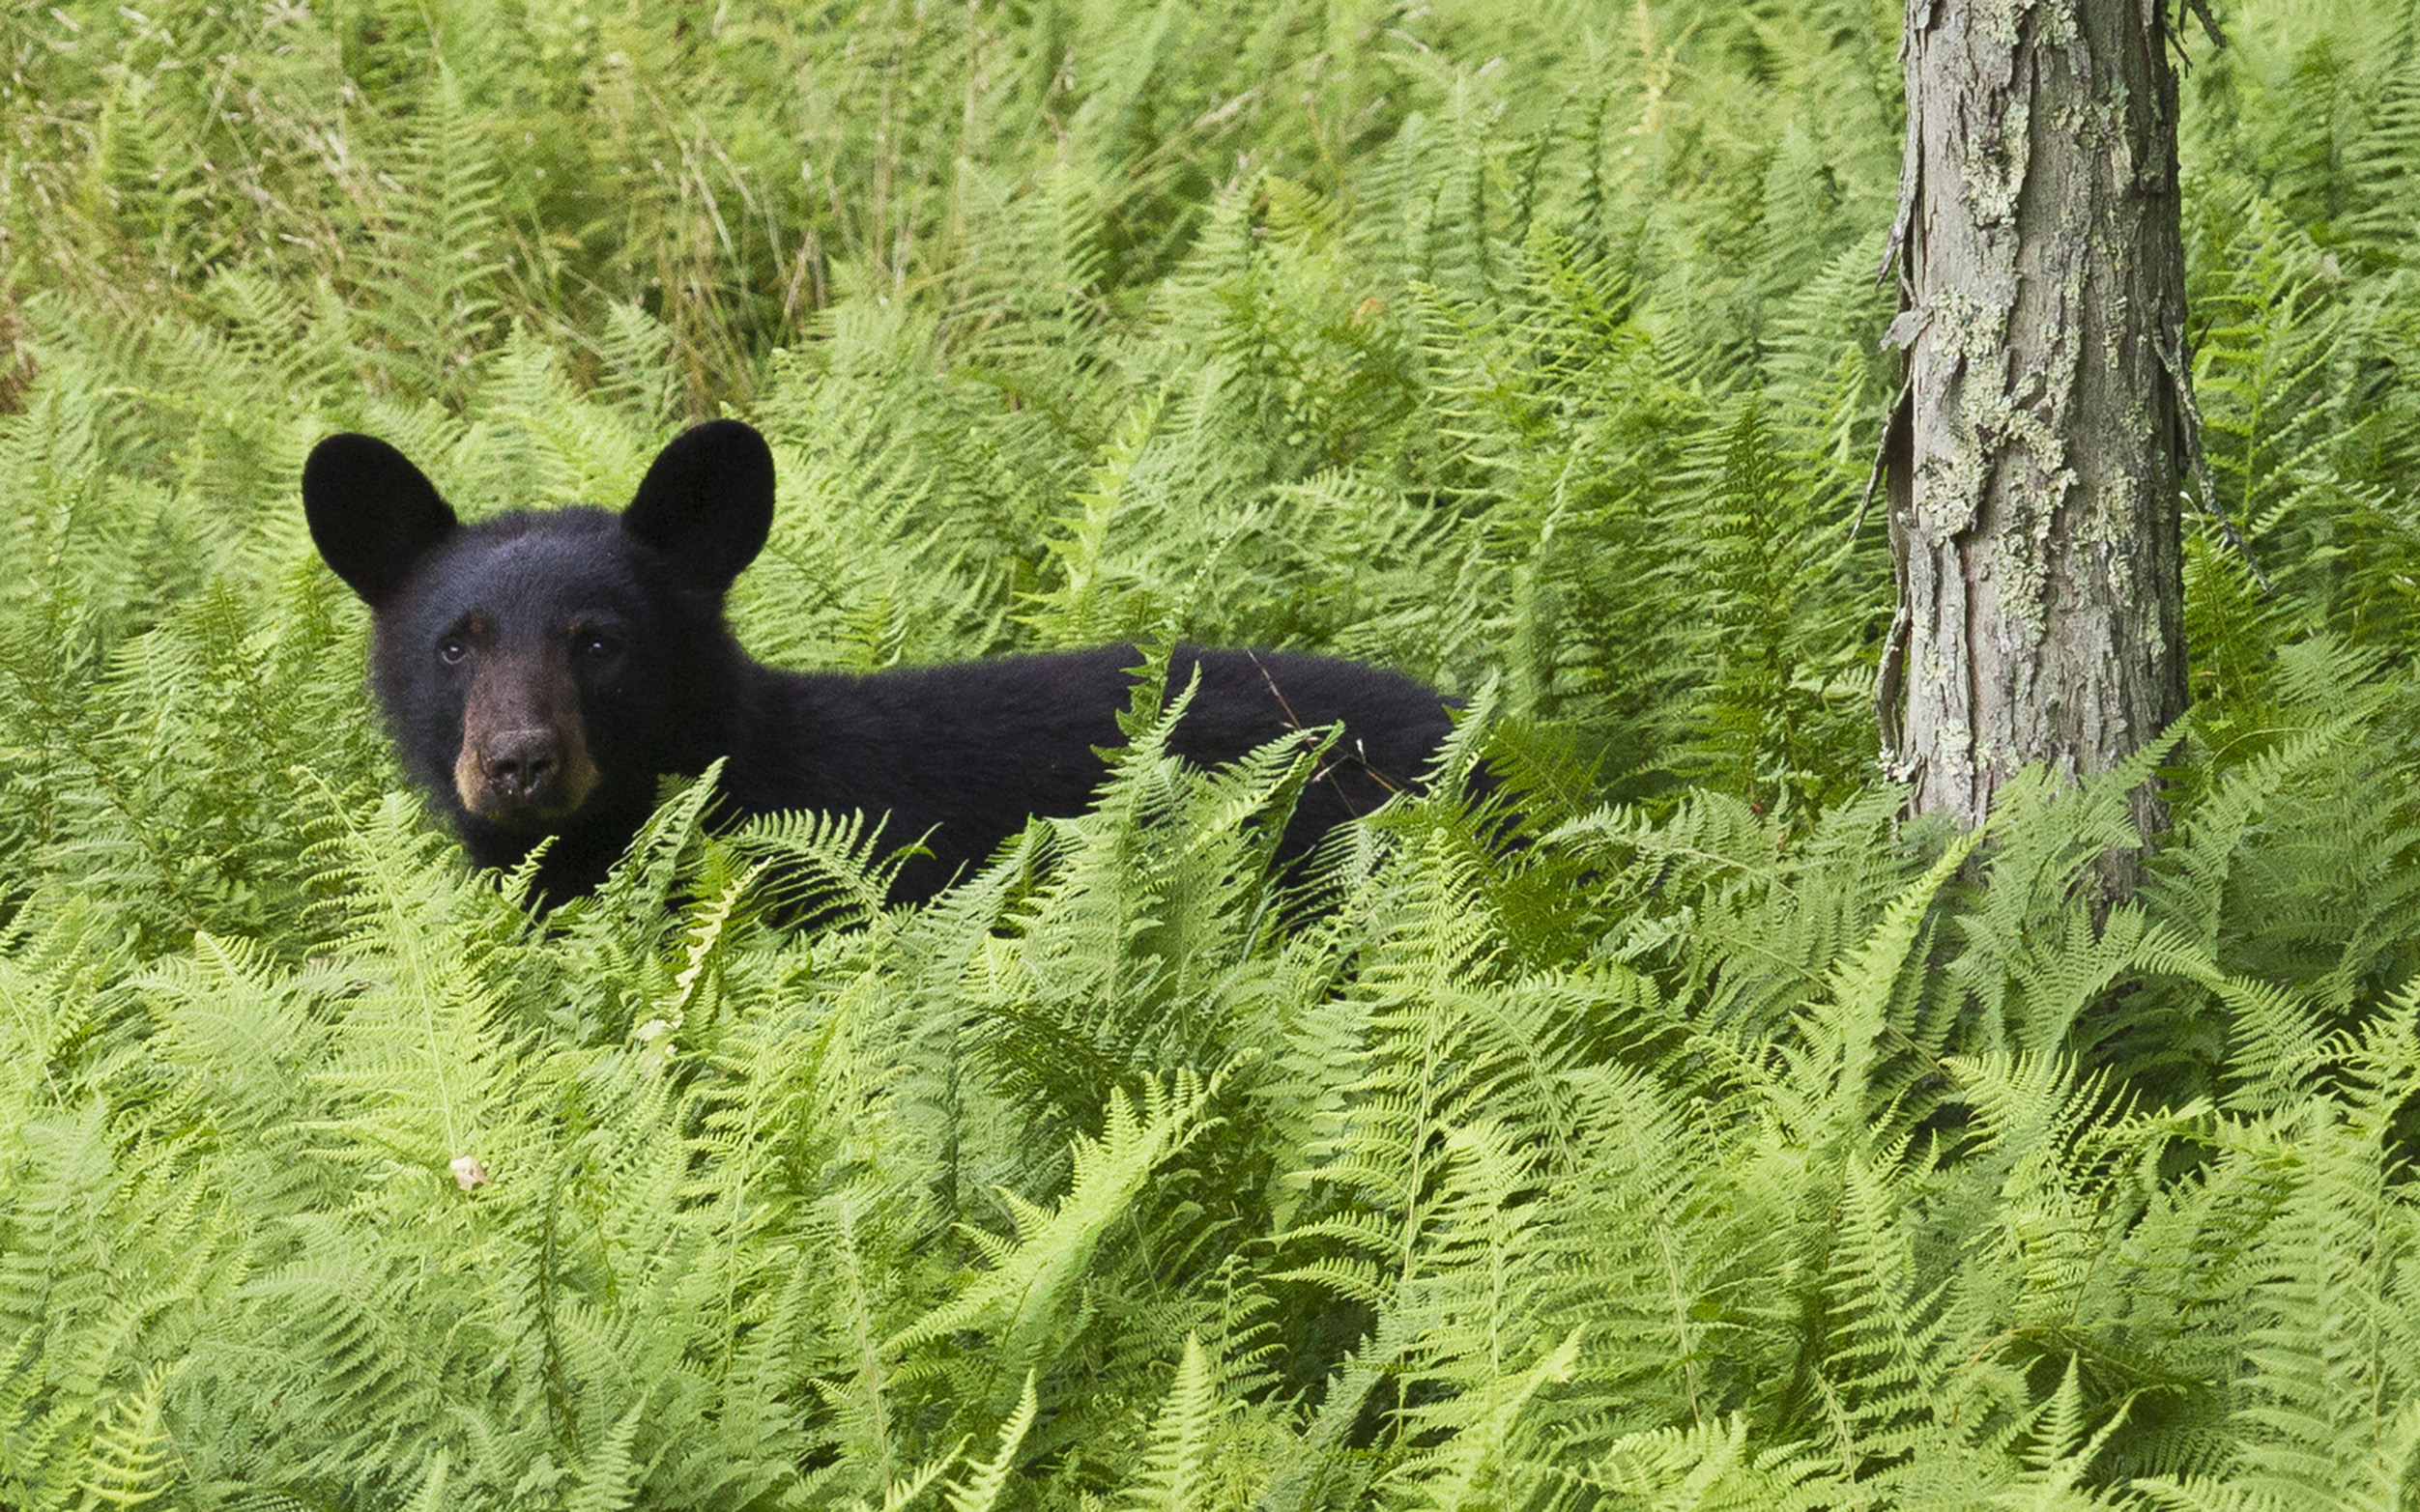 A young black bear stands amid a growth of ferns.